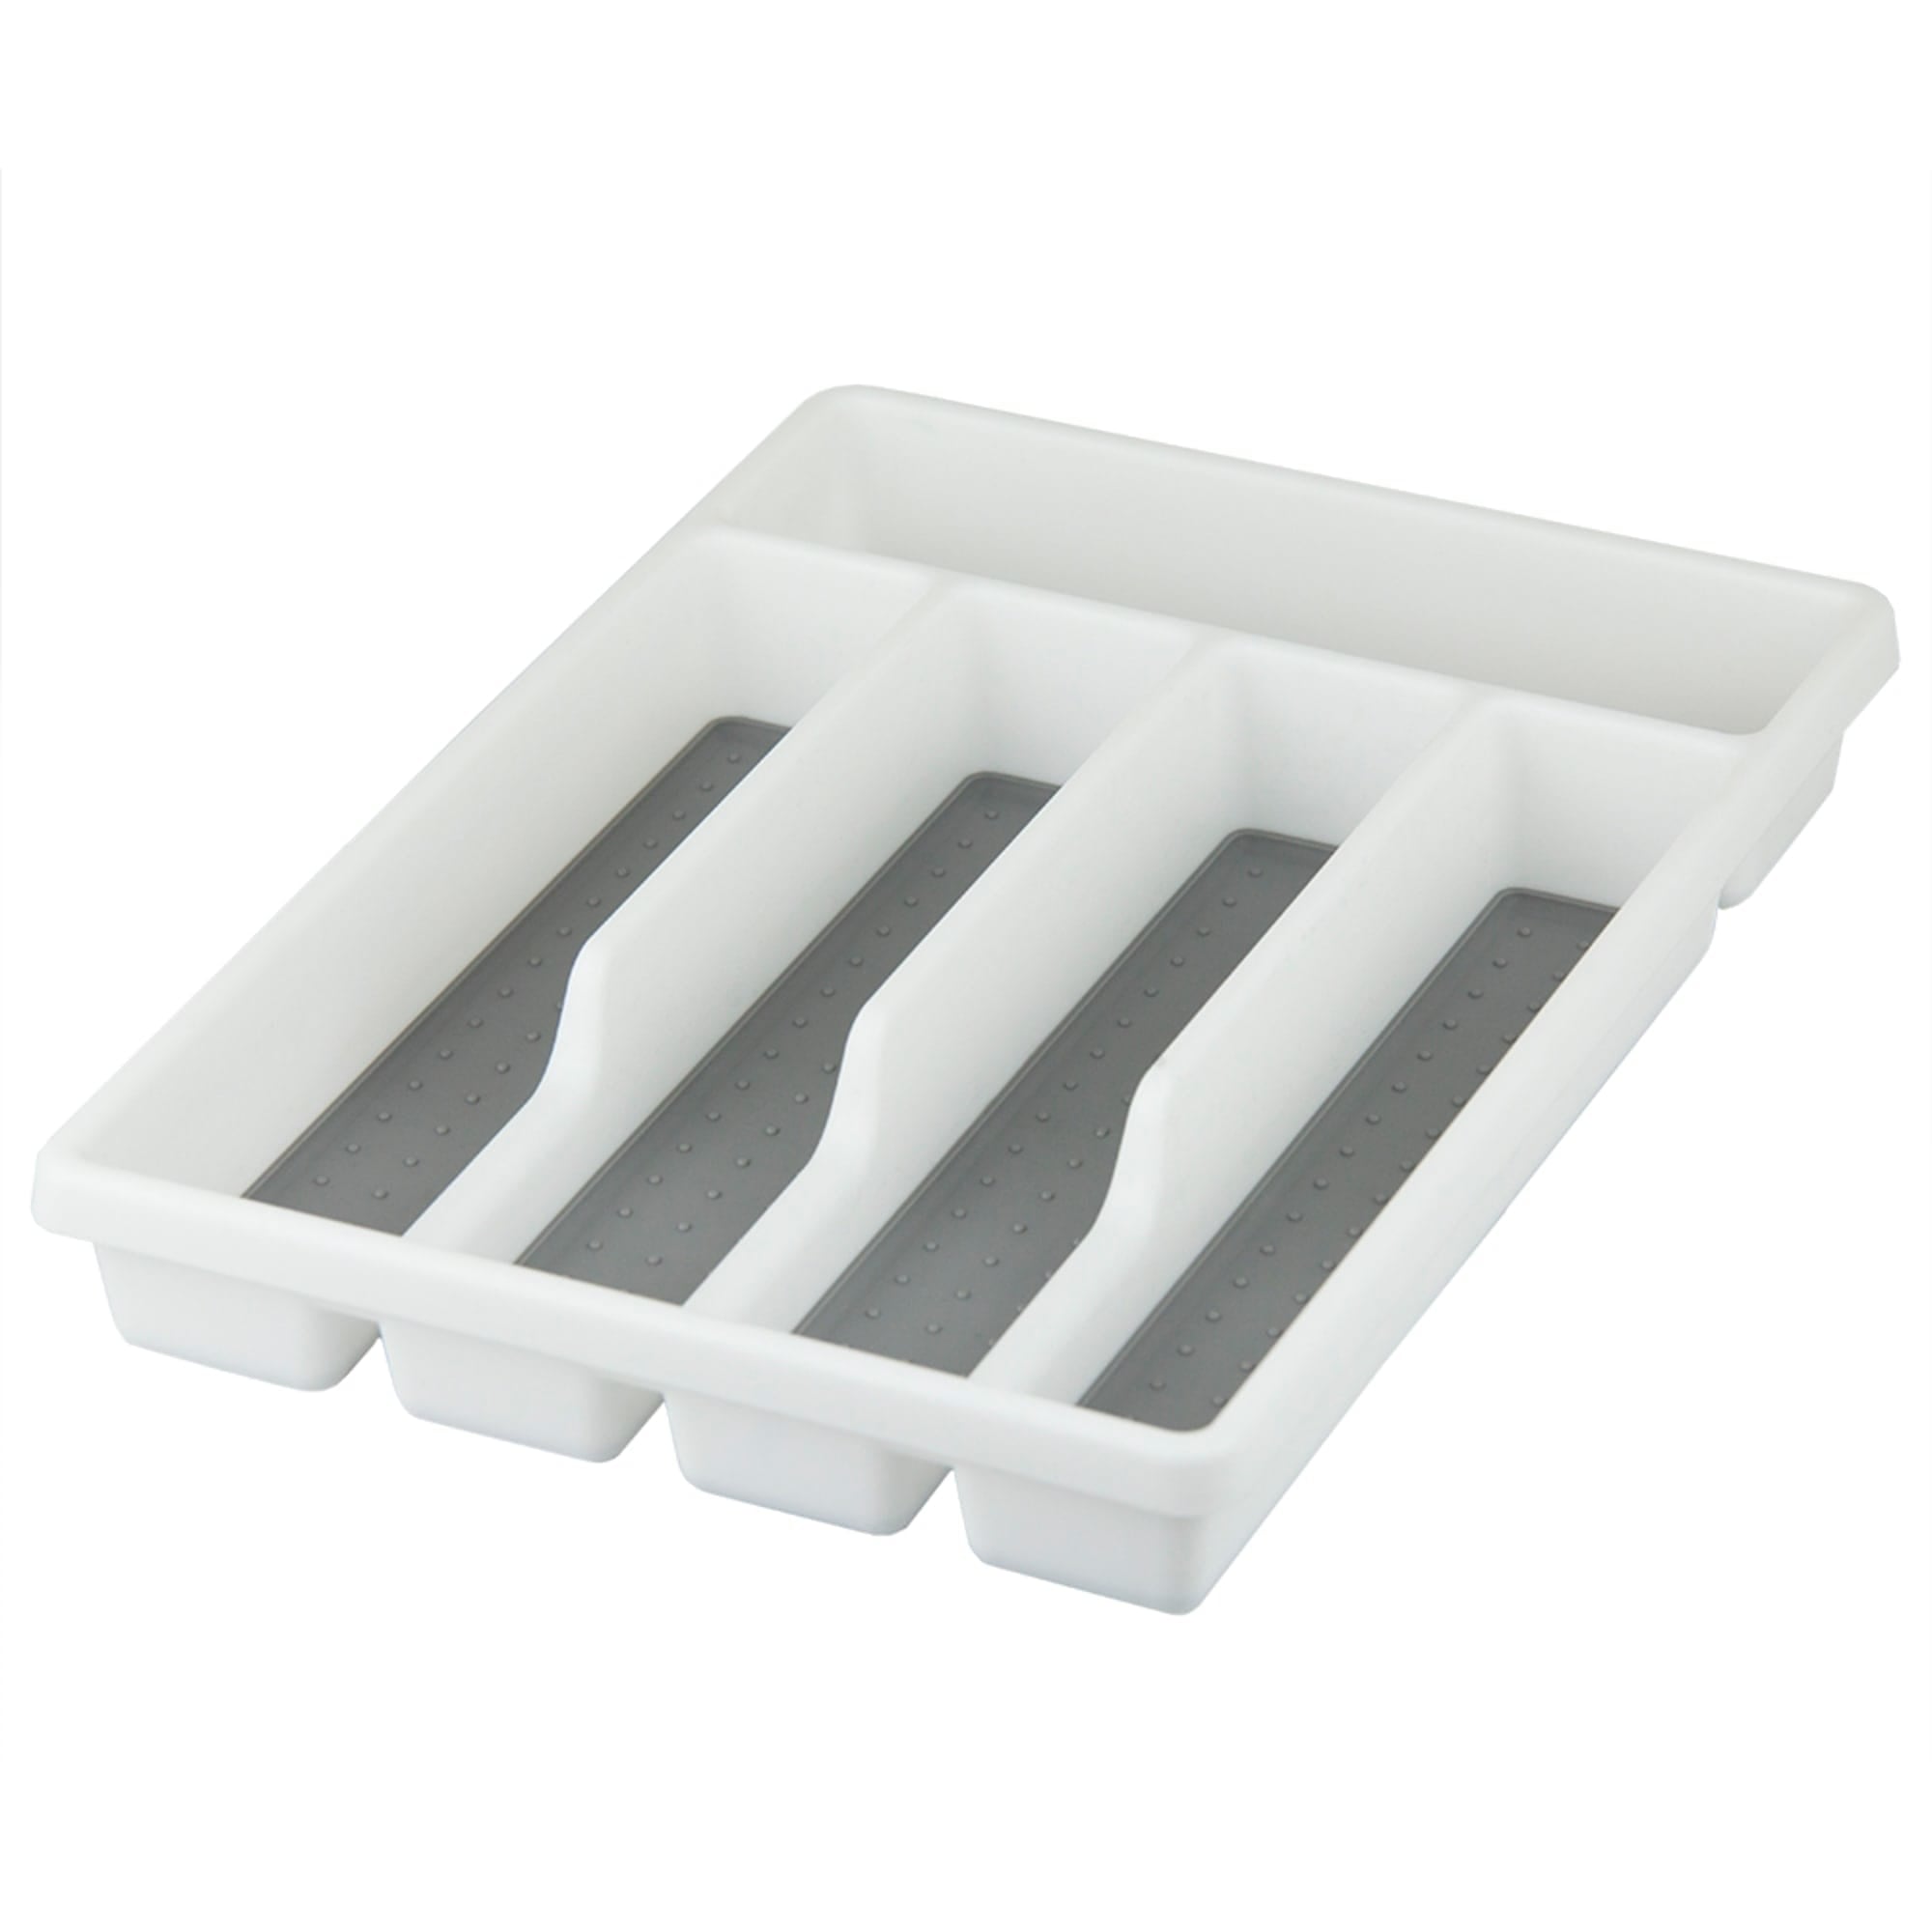 Home Basics Plastic Cutlery Tray with Rubber-Lined Compartments, White $5.00 EACH, CASE PACK OF 12